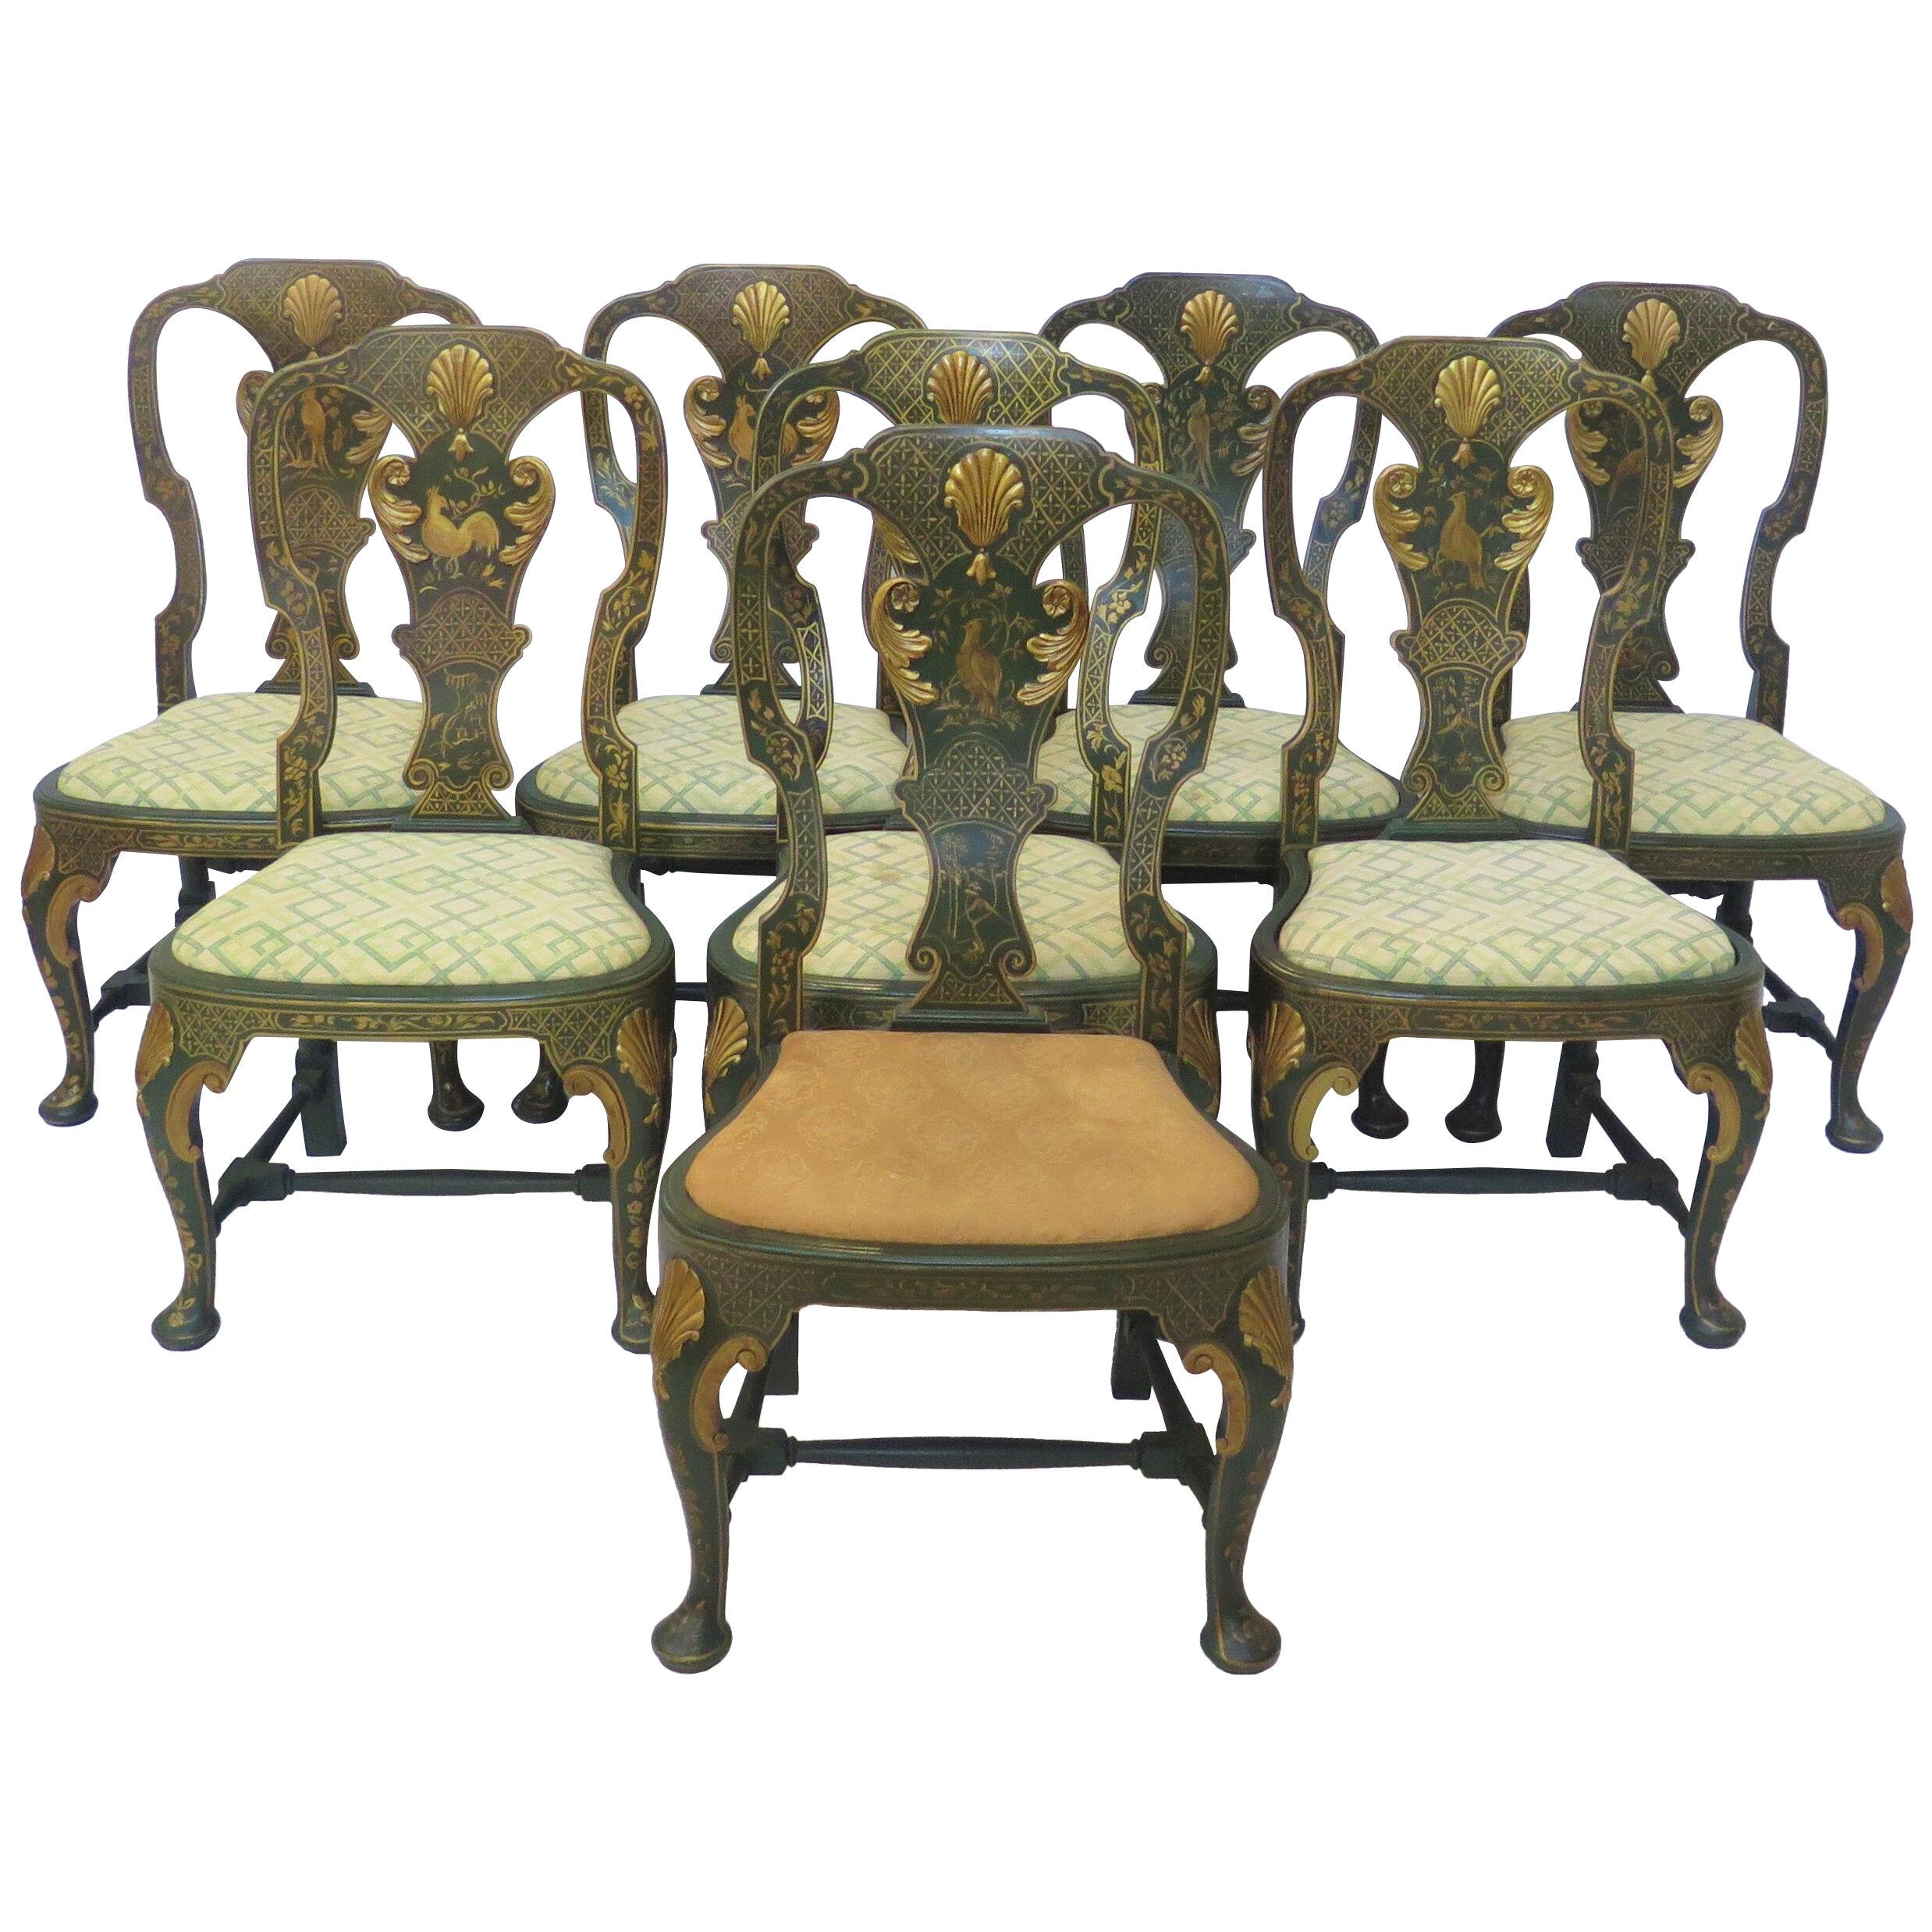 Group of Eight (8) Queen Anne-Style Chairs with Green Chinoiserie Decoration